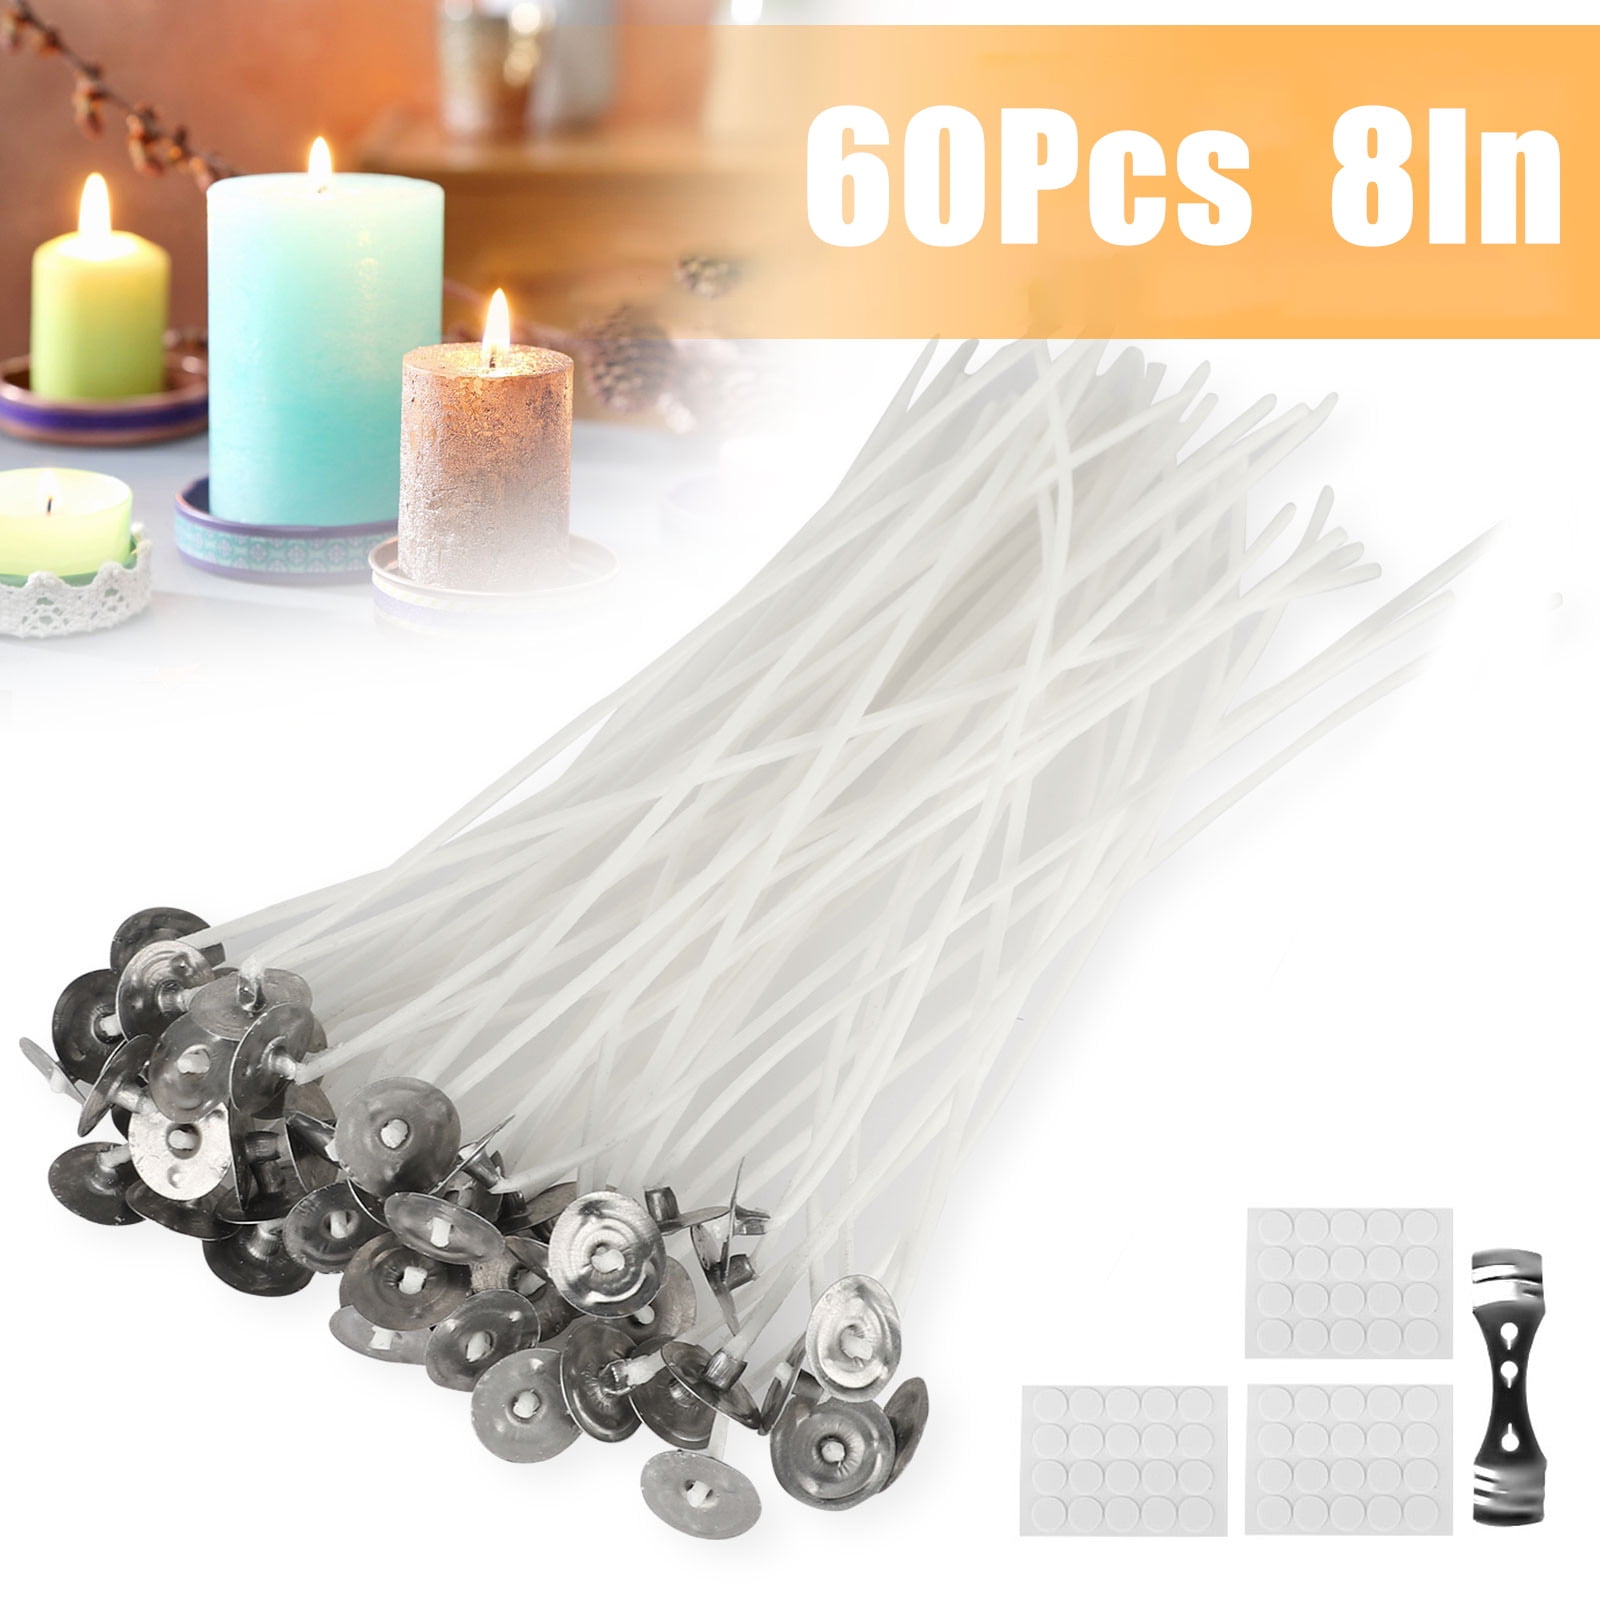 100 x 20cm High Quality Waxed Wicks DIY Candle Making Chritmas with Sustainers 